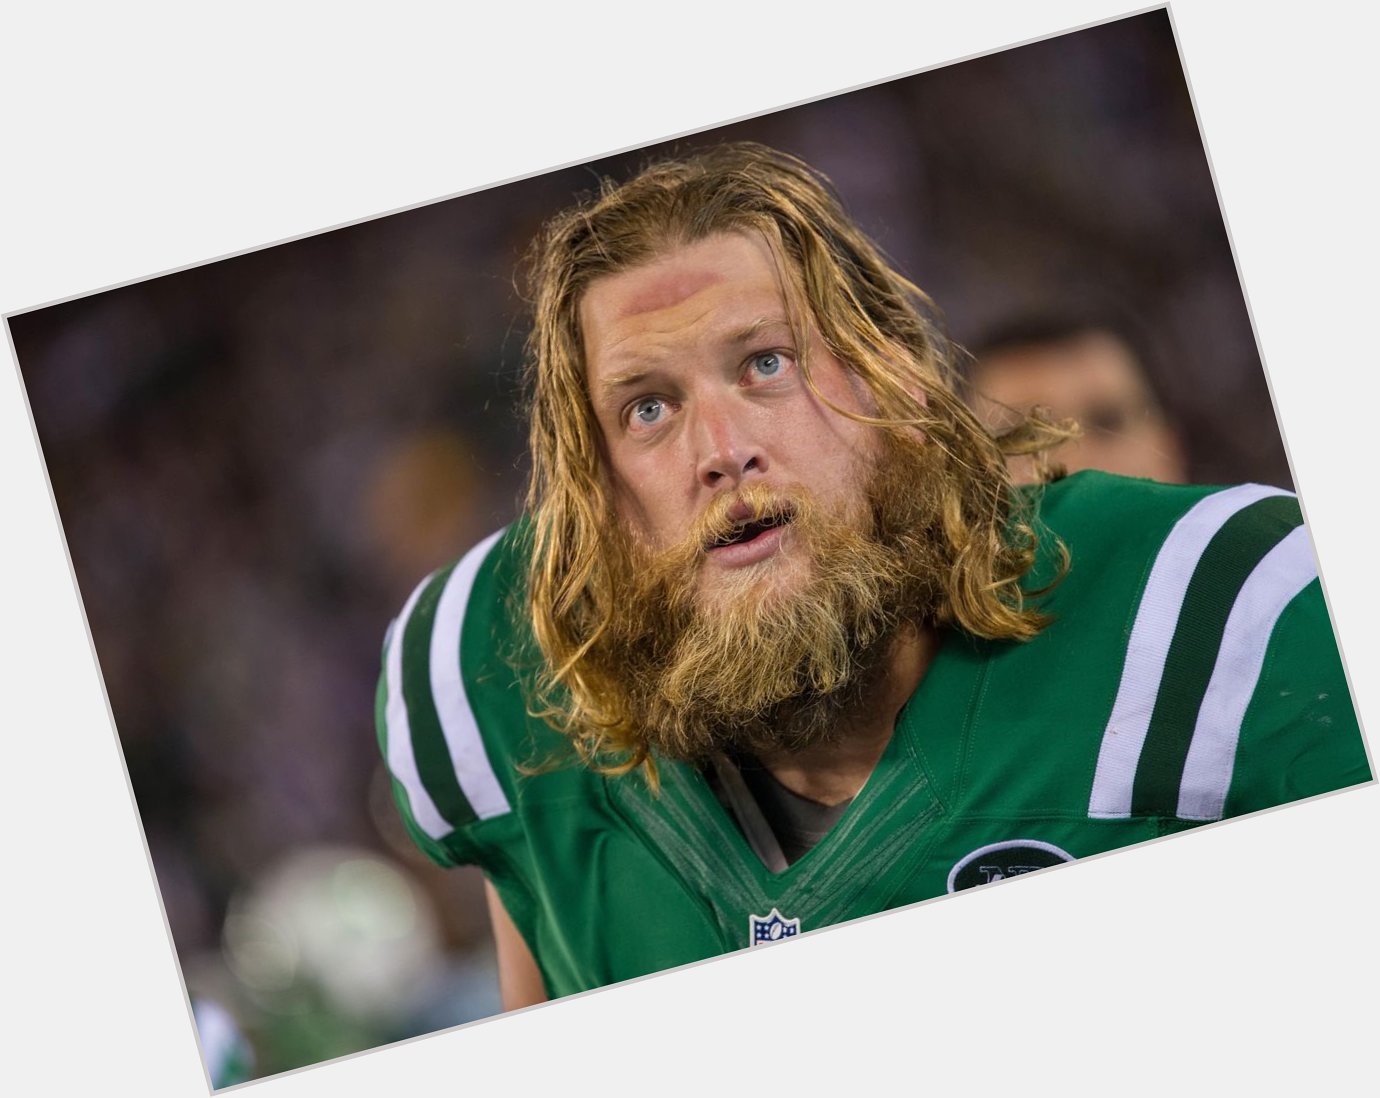 Help us wish a very happy 35th birthday to this lovable legend: Nick Mangold!   